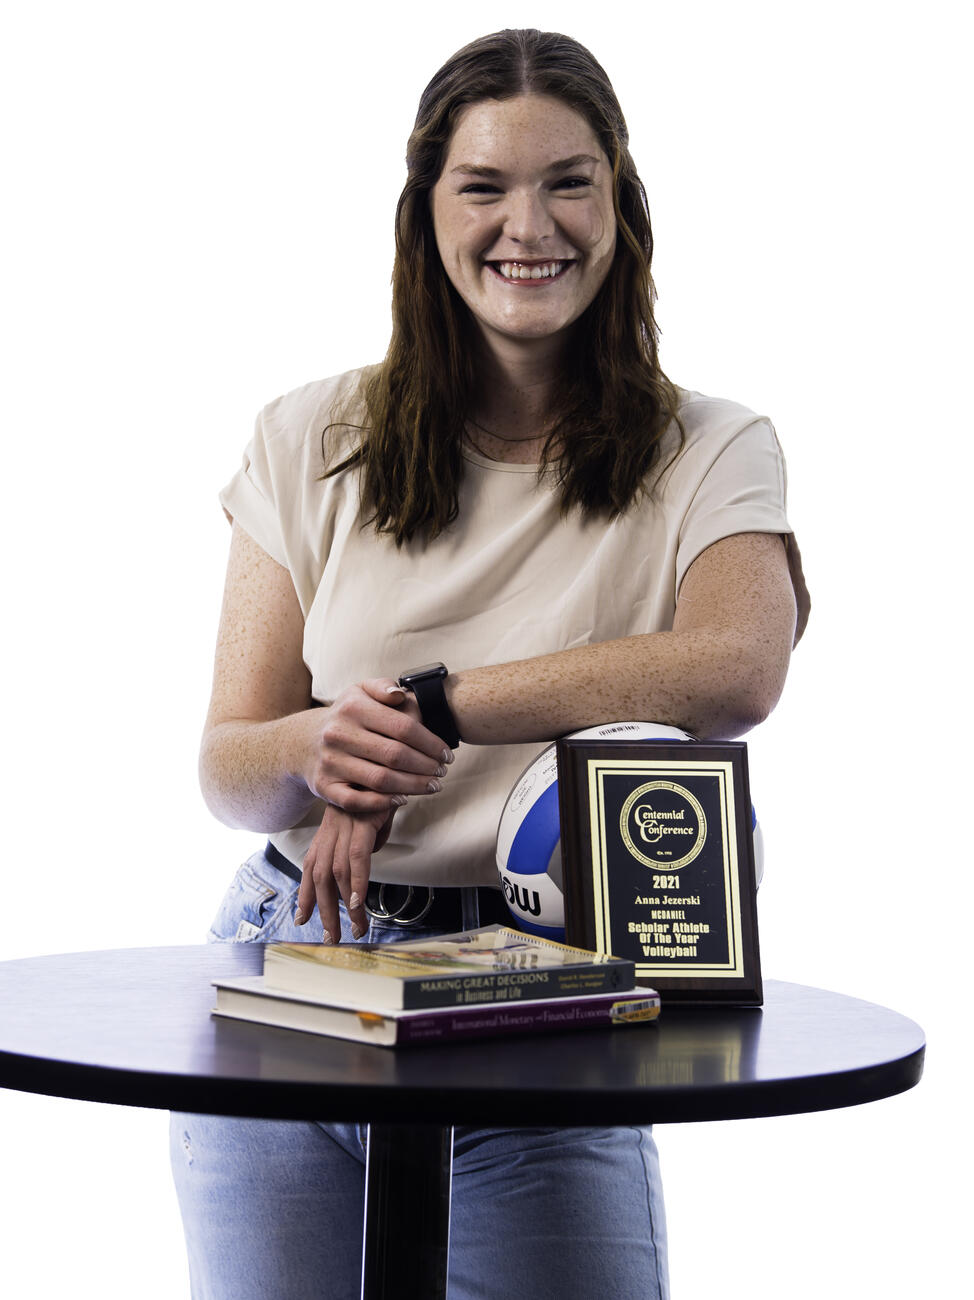 Anna Jezerski poses by a table holding a plaque and some books.